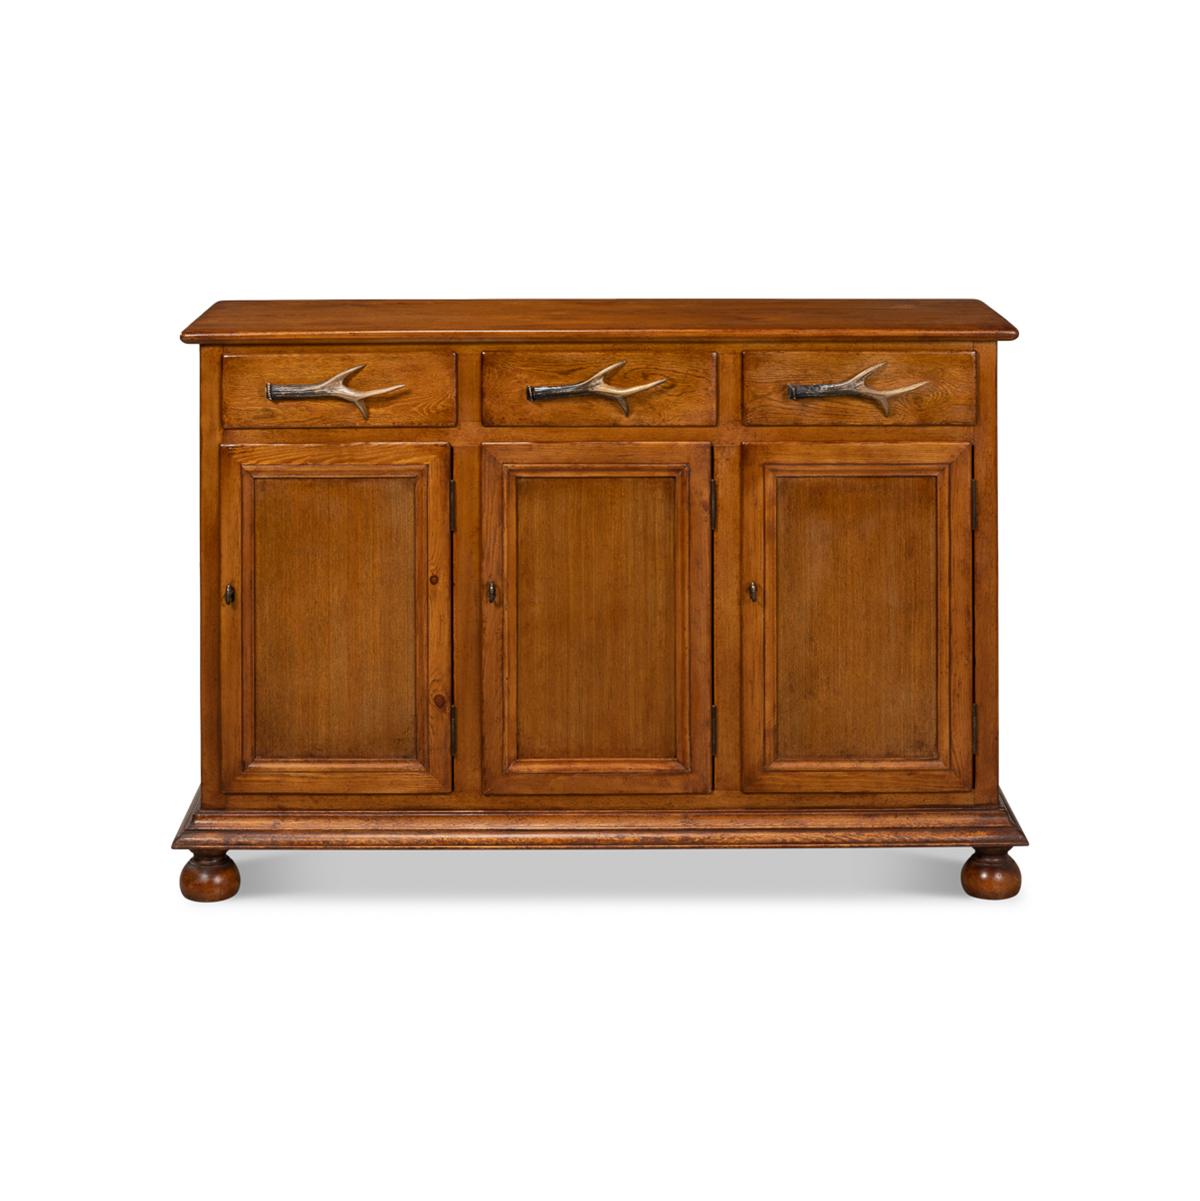 Made of solid pine in a warm medium wood finish. With three drawers above three cabinet doors, having metal cast Elk horn handles. The fitted interior with shelves and raised-on ball feet.

Dimensions: 53